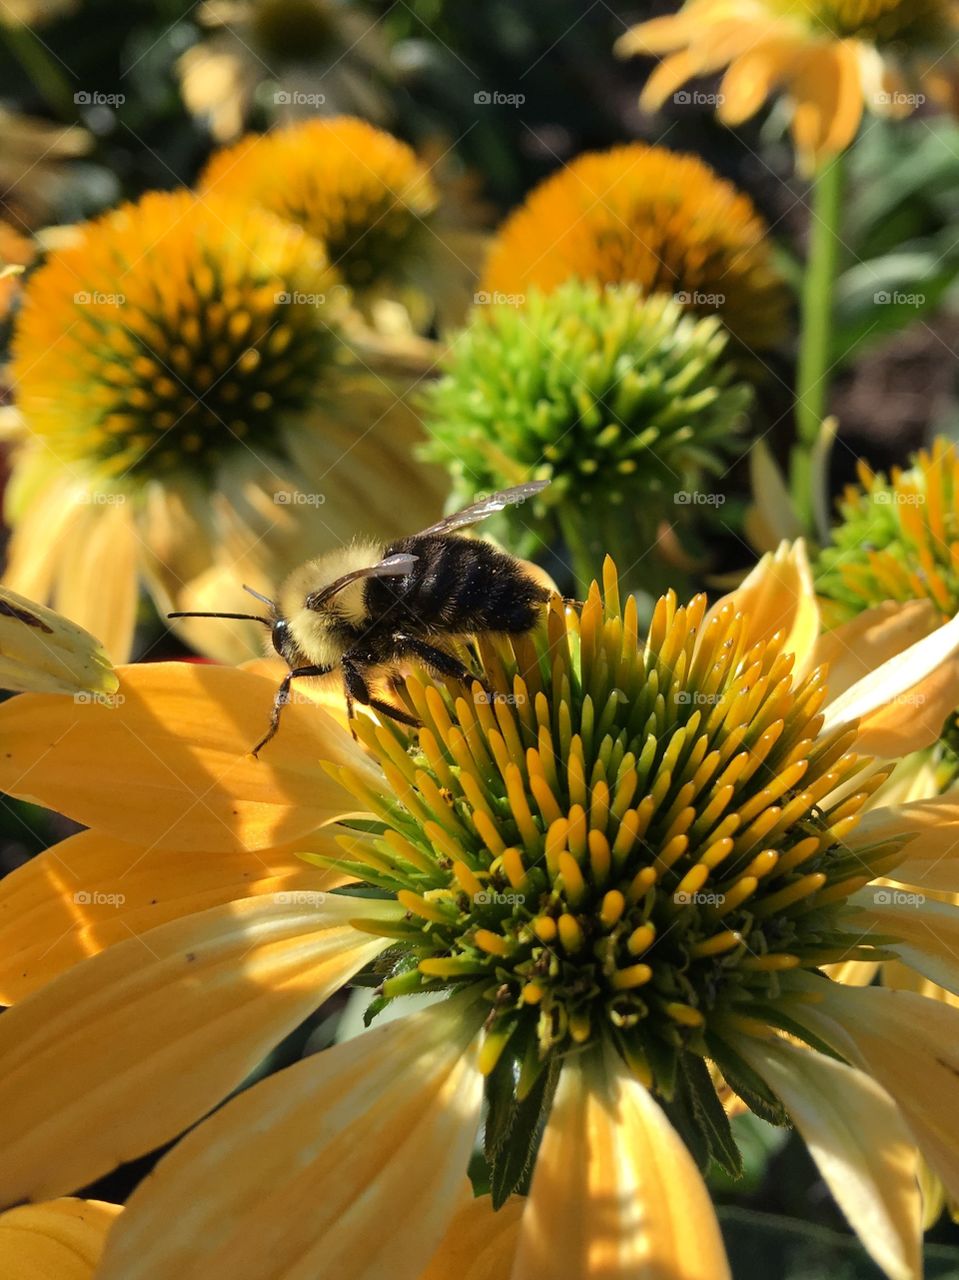 A busy bee working in the sunlight